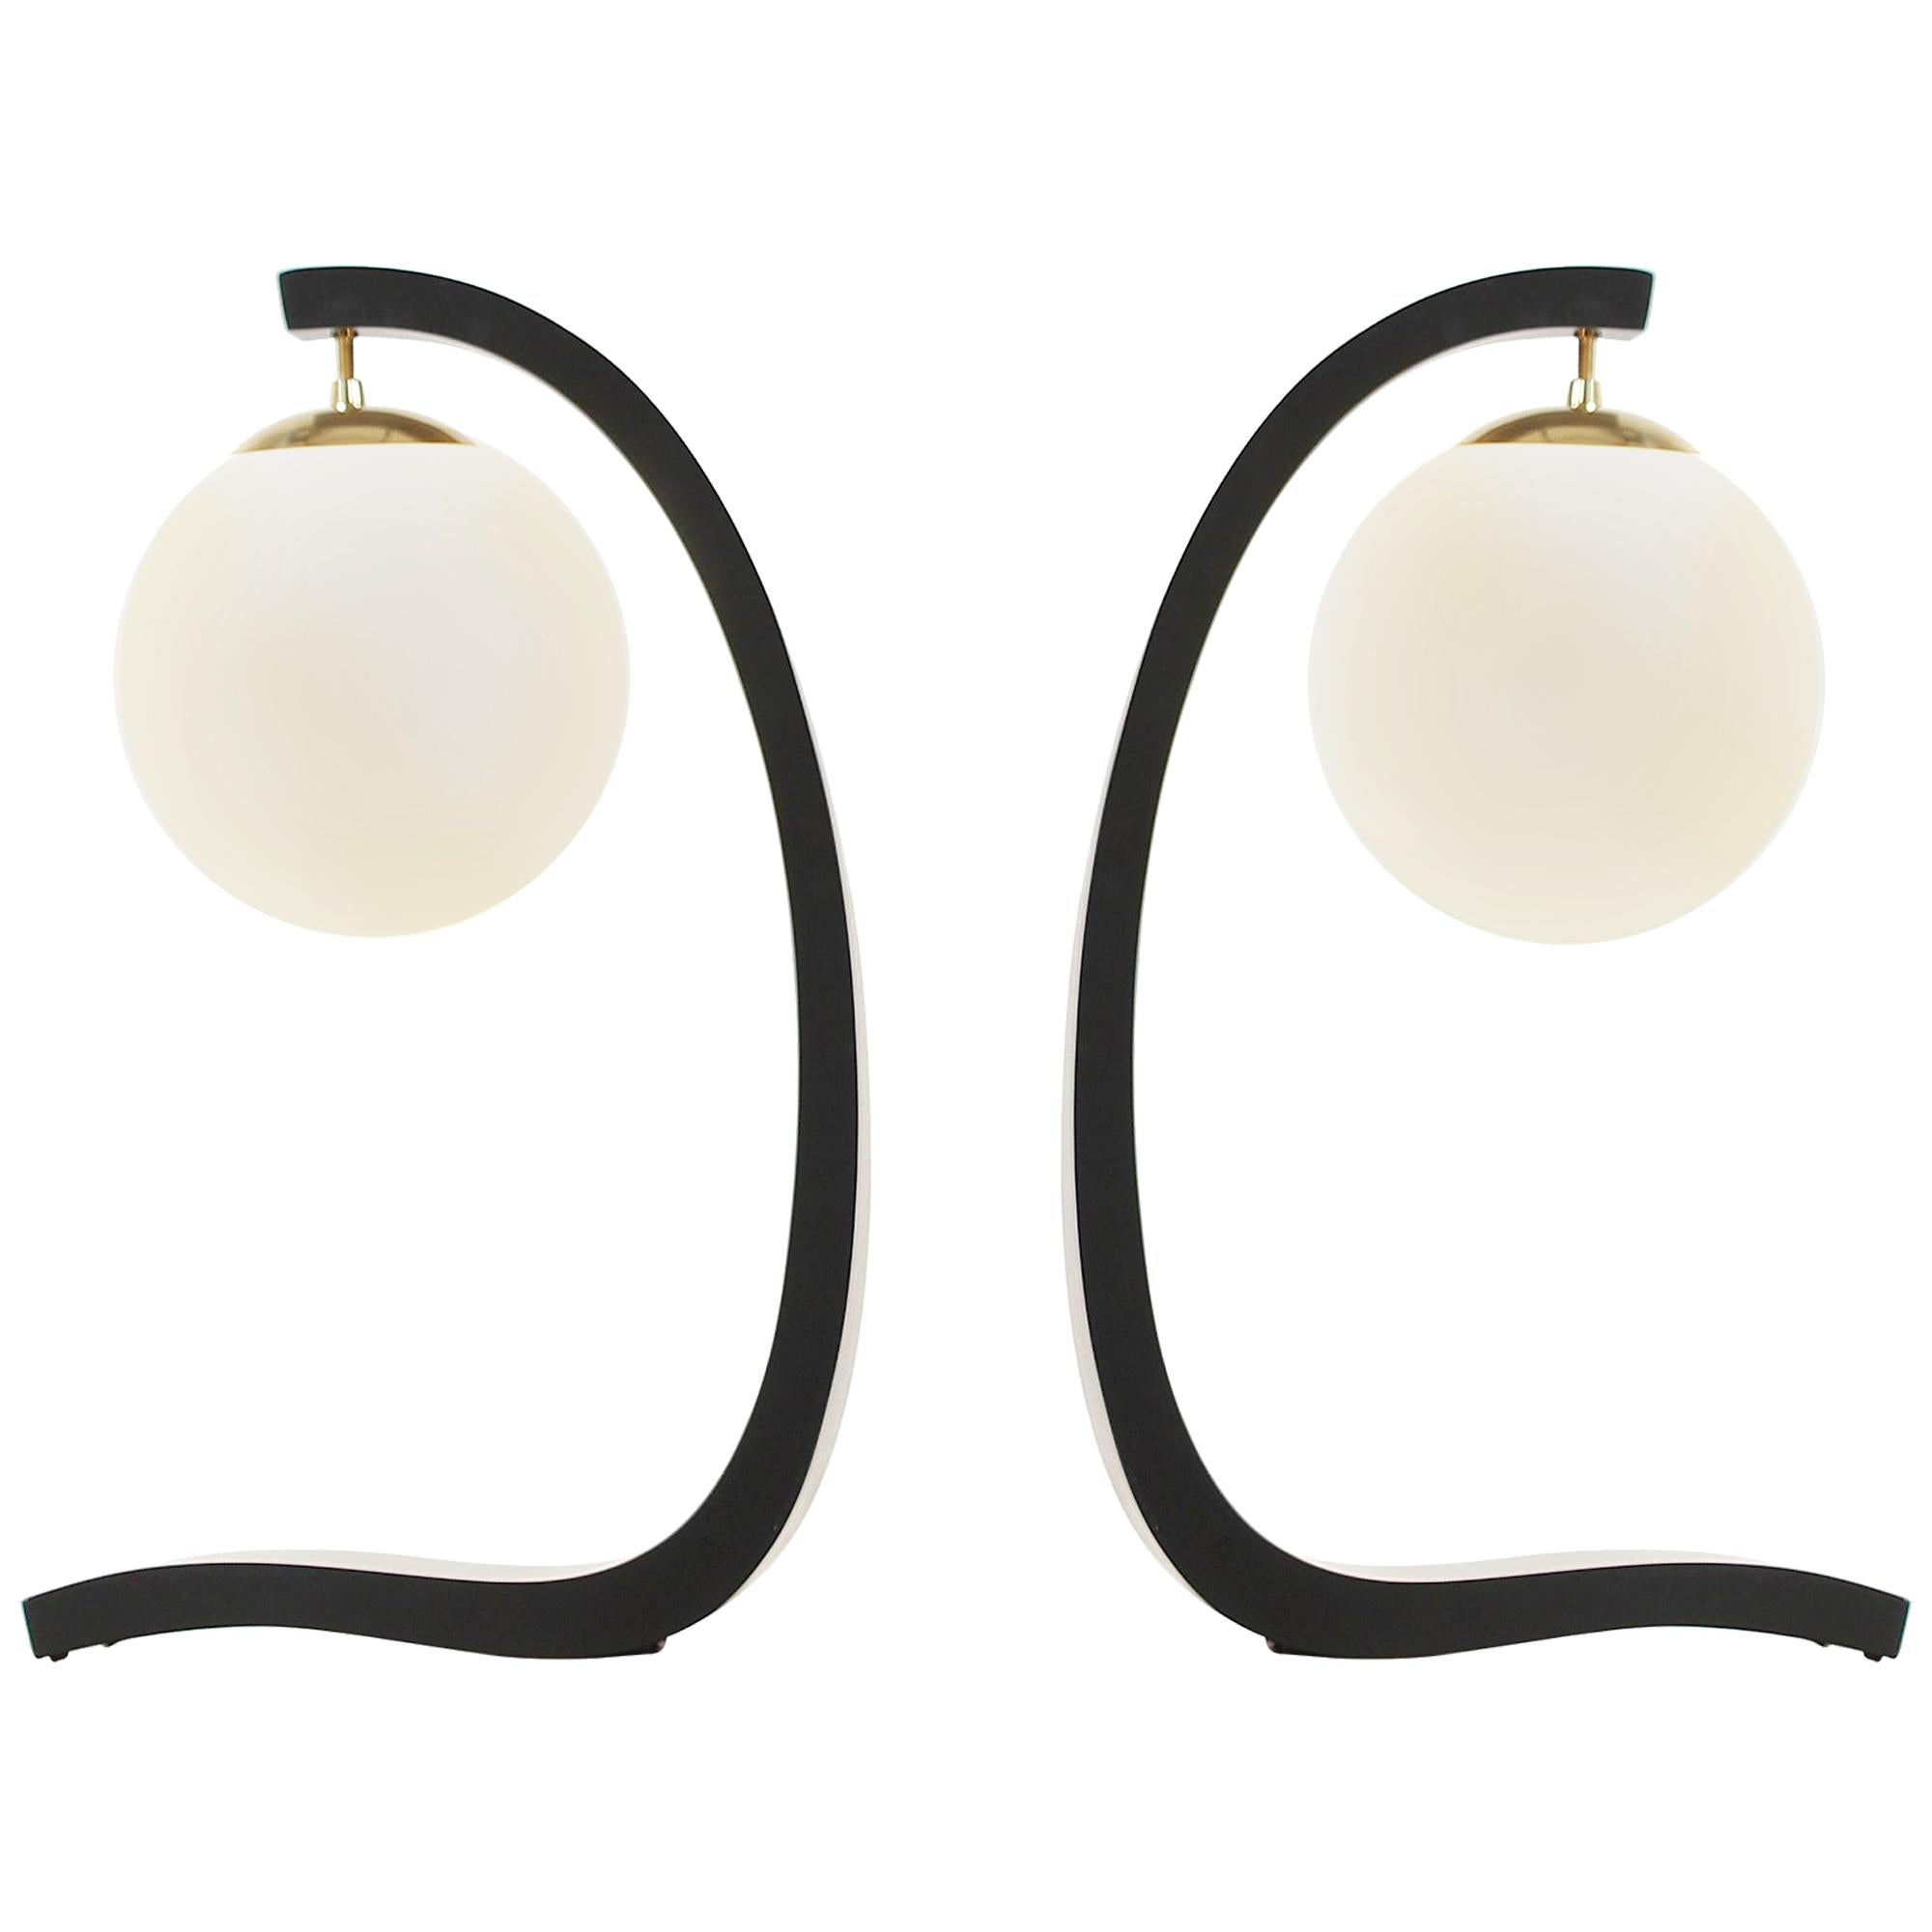 Jack Haywood Sculptural Table Lamps by Modeline